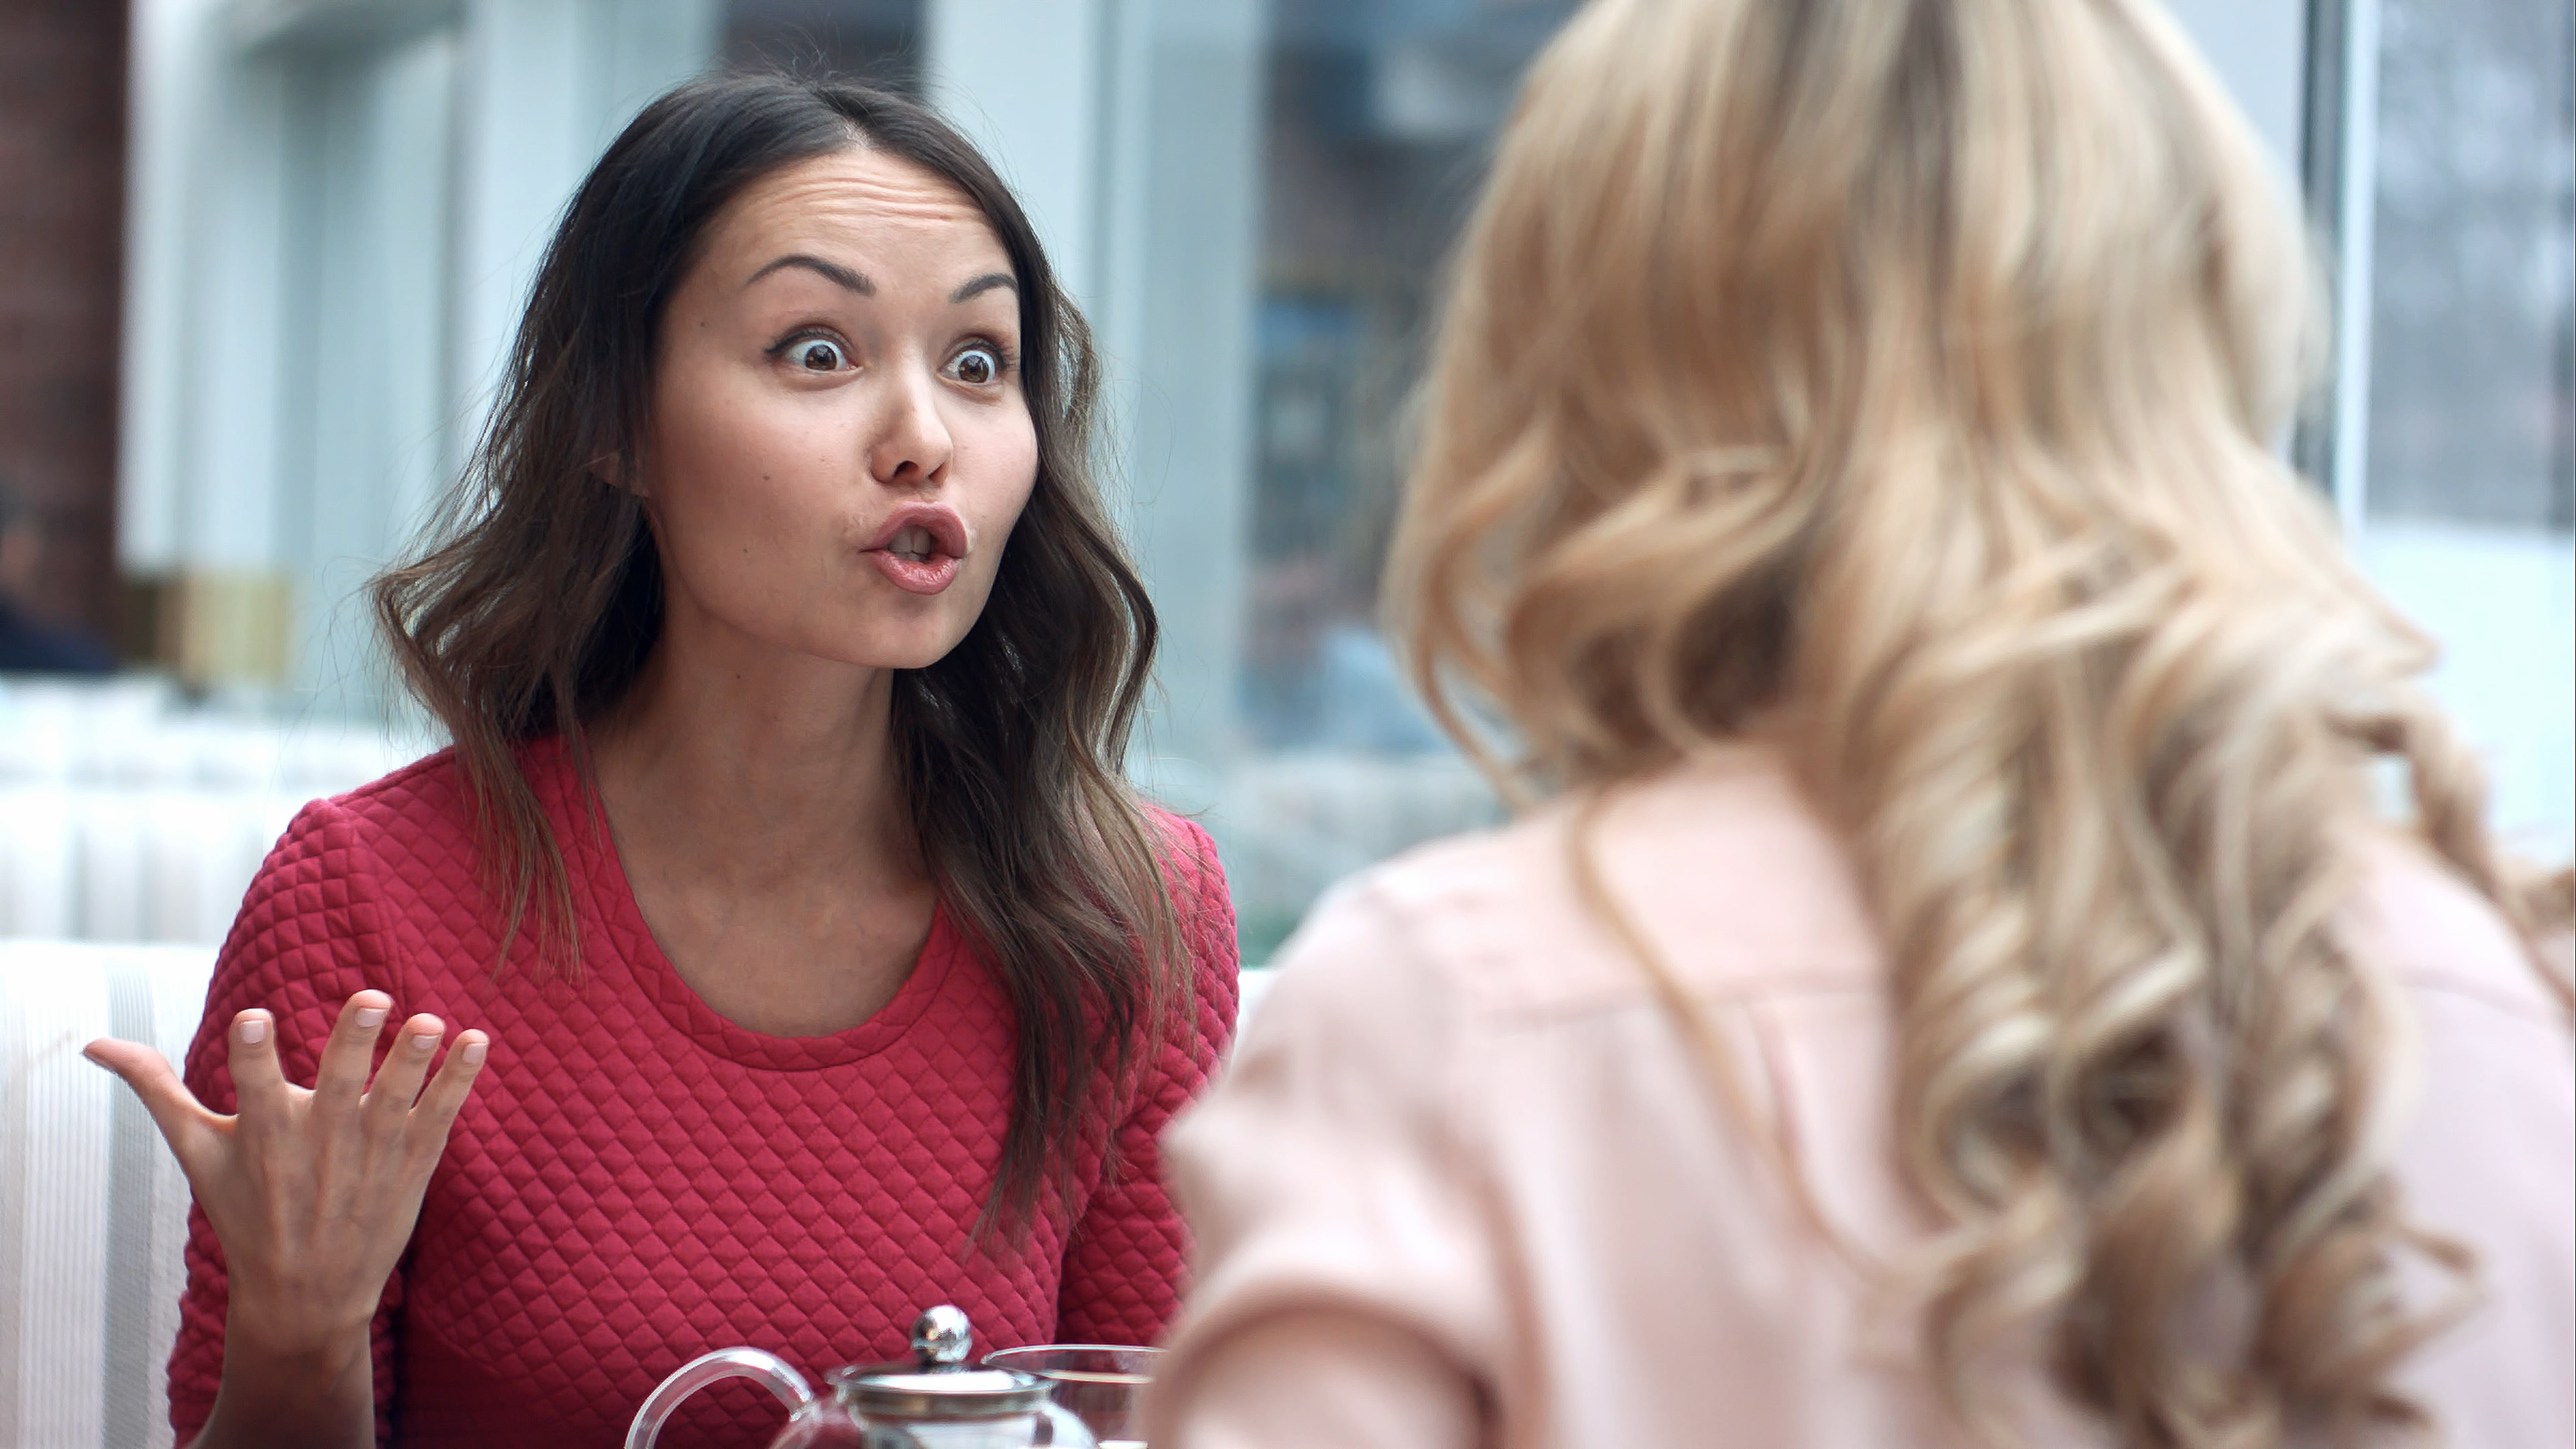 Two young women arguing in a restaurant | Source: Shutterstock